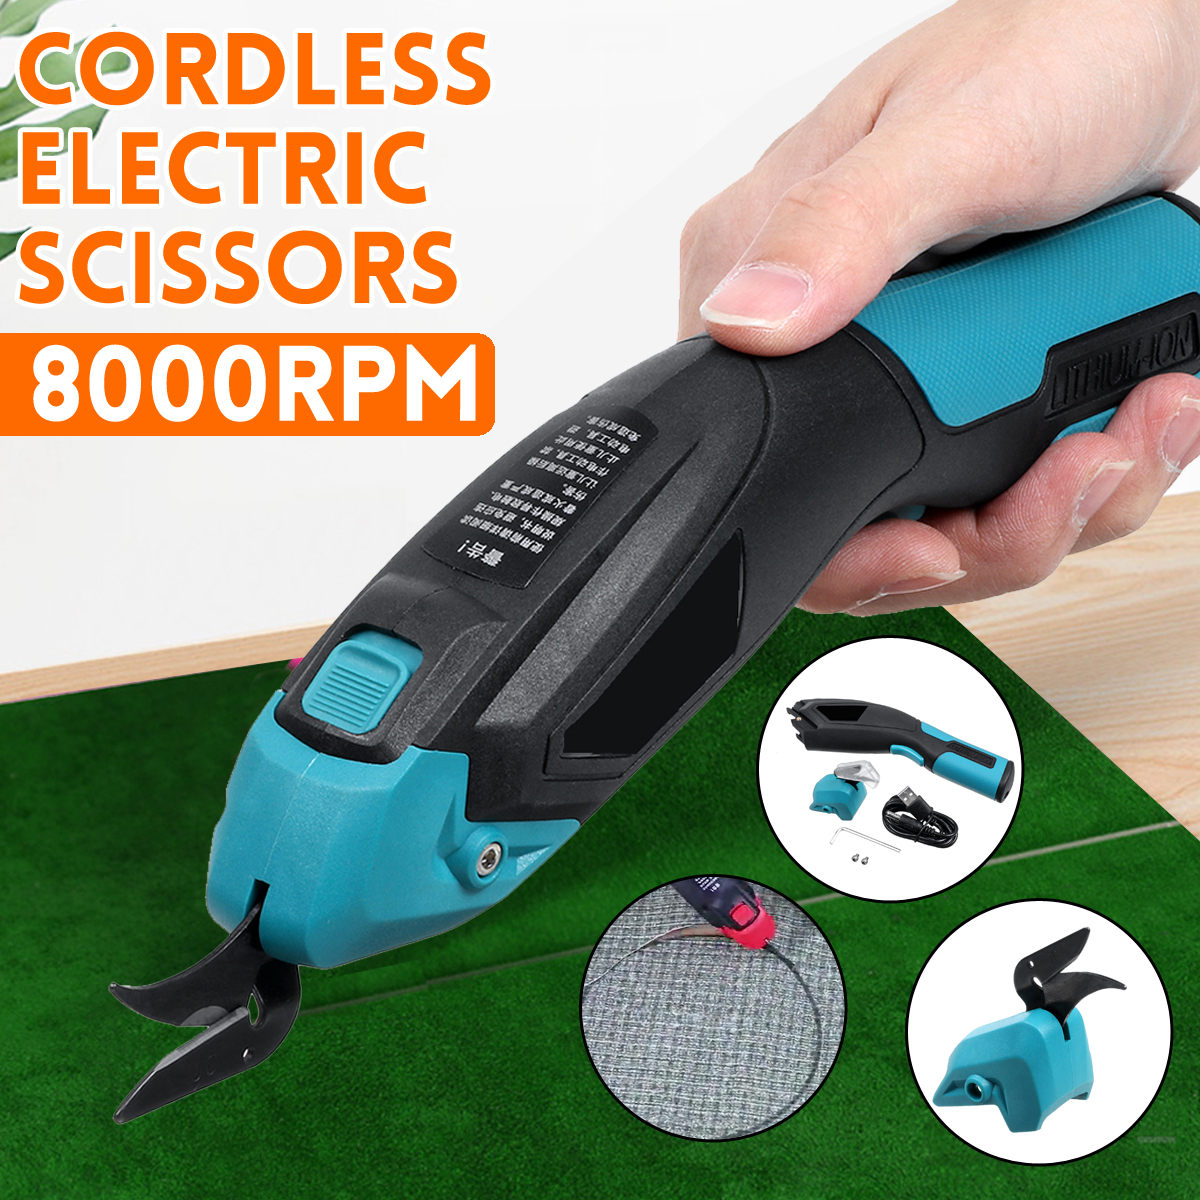 DC-4V-Portable-Cordless-Electric-Scissors-Leather-Fabric-Crafts-Cutter-Cutting-Tool-1733406-2